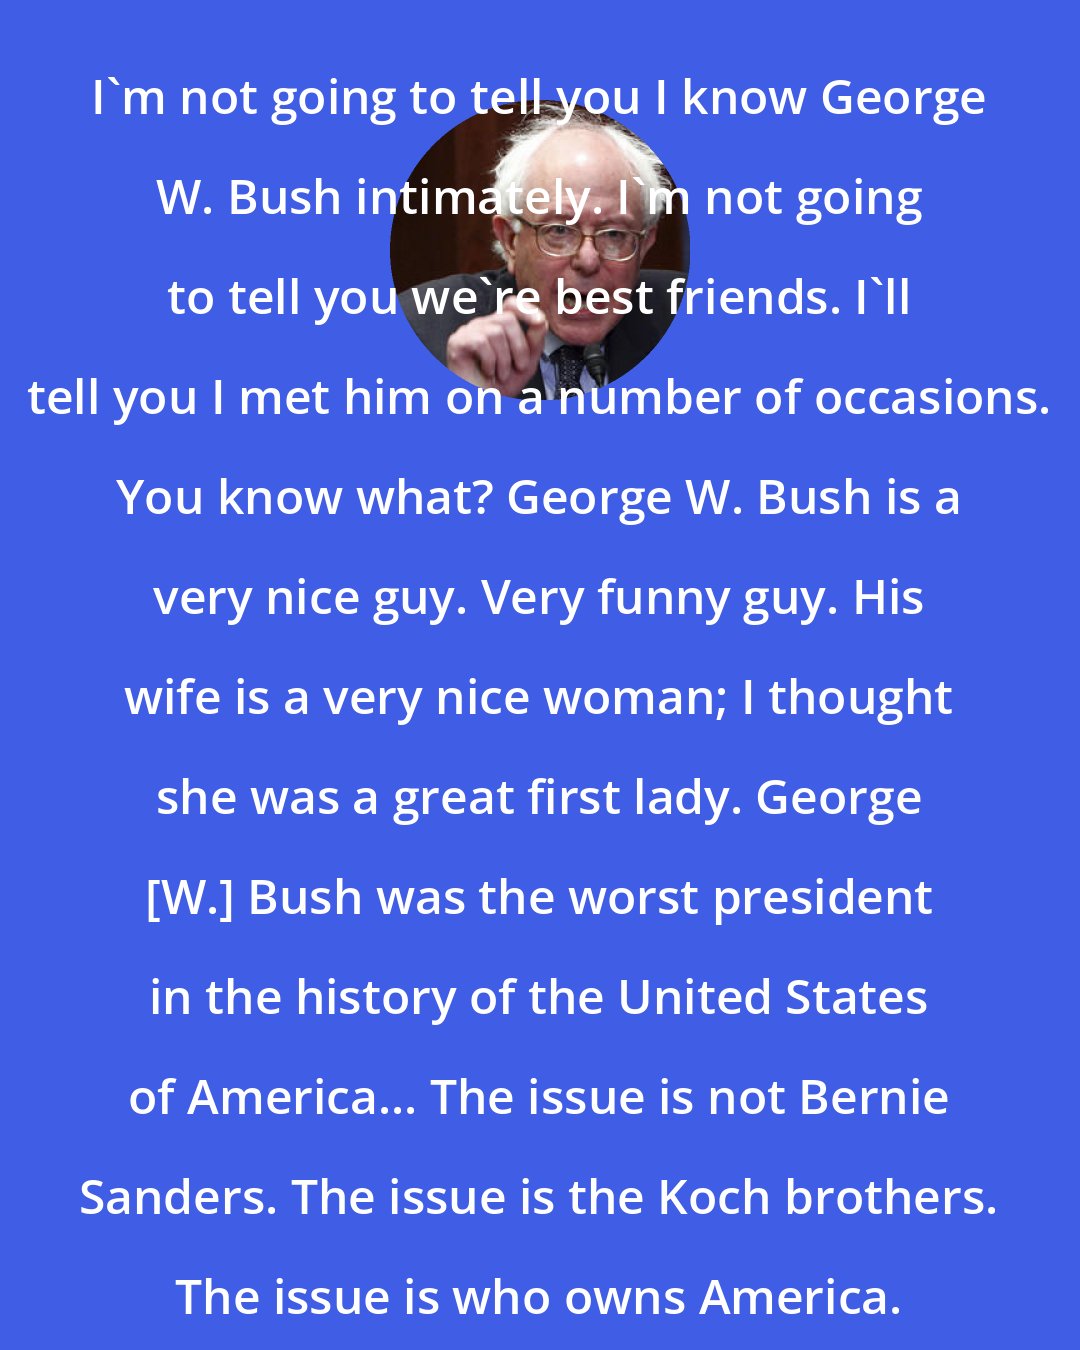 Bernie Sanders: I'm not going to tell you I know George W. Bush intimately. I'm not going to tell you we're best friends. I'll tell you I met him on a number of occasions. You know what? George W. Bush is a very nice guy. Very funny guy. His wife is a very nice woman; I thought she was a great first lady. George [W.] Bush was the worst president in the history of the United States of America... The issue is not Bernie Sanders. The issue is the Koch brothers. The issue is who owns America.